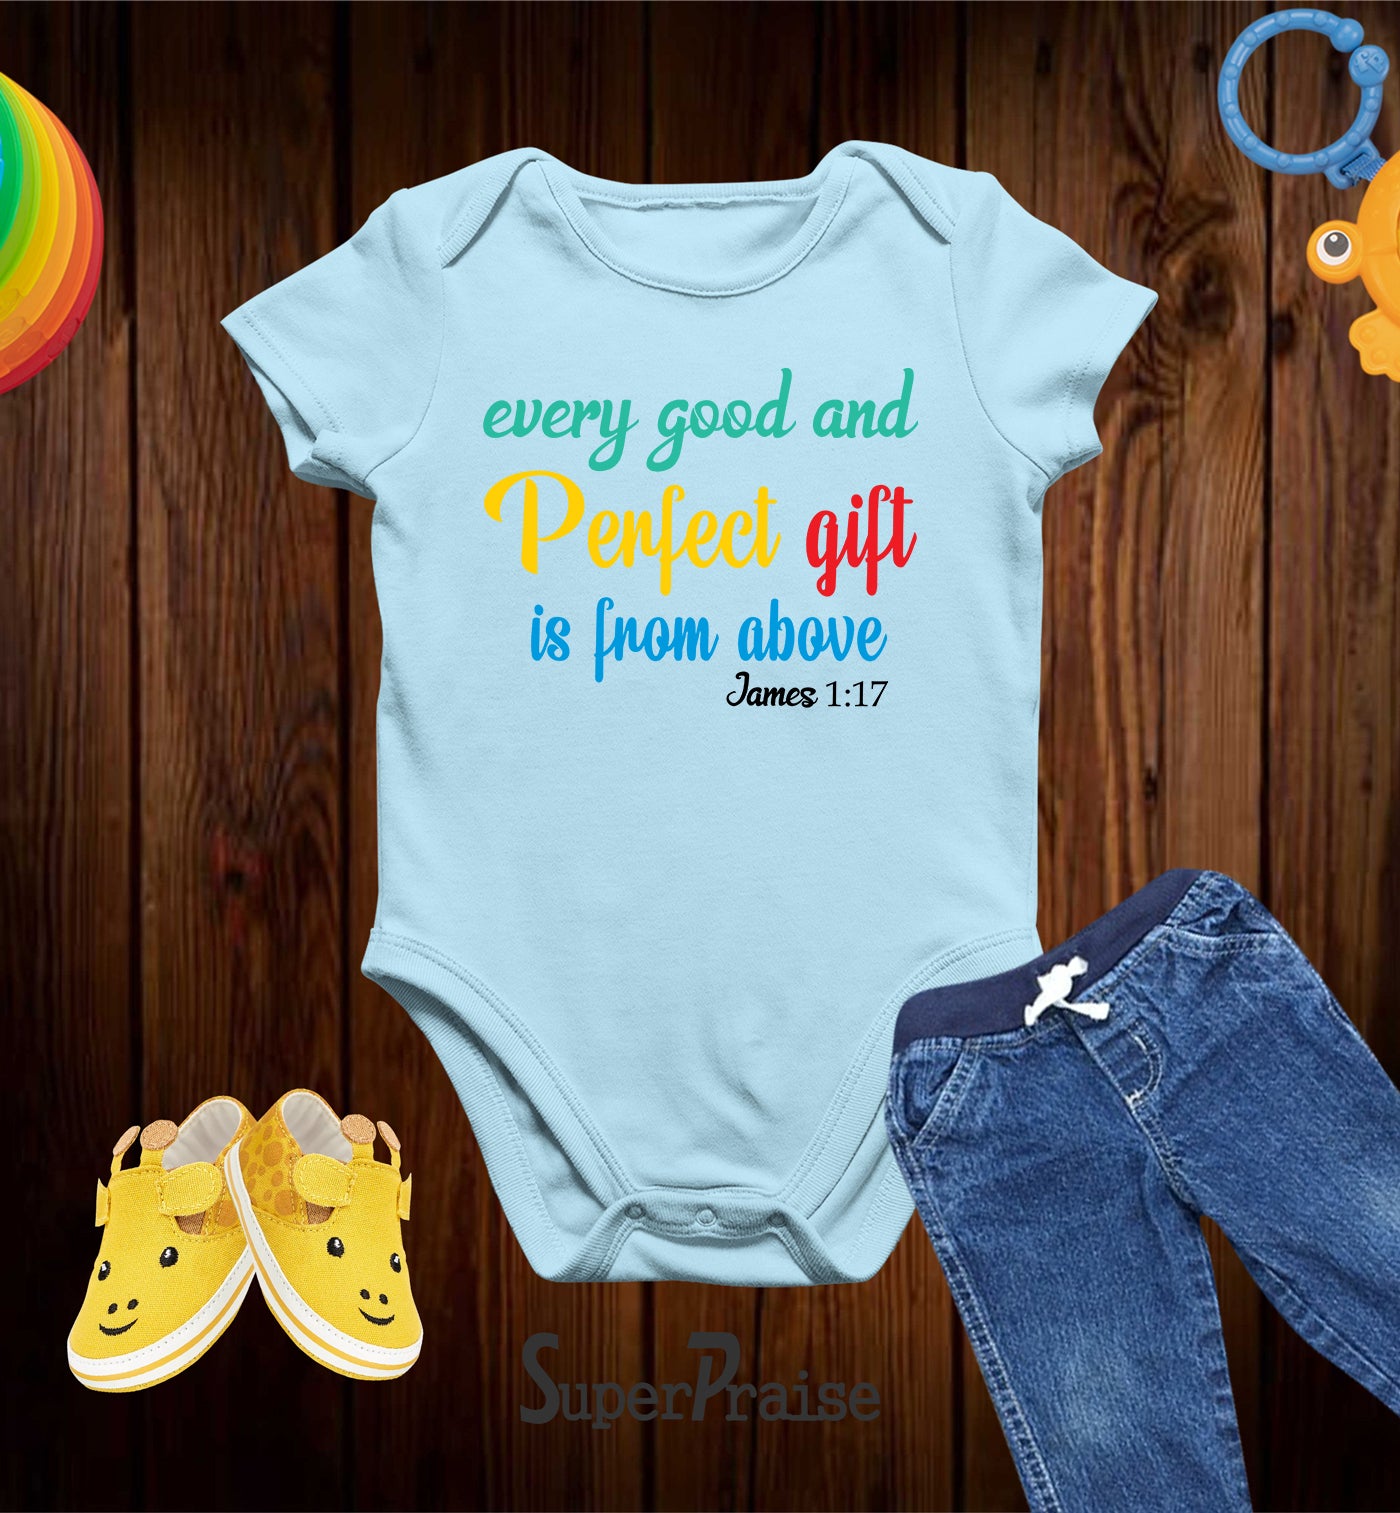 Every Good And Perfect Gift Is From Above James 1:17 Baby Bodysuit